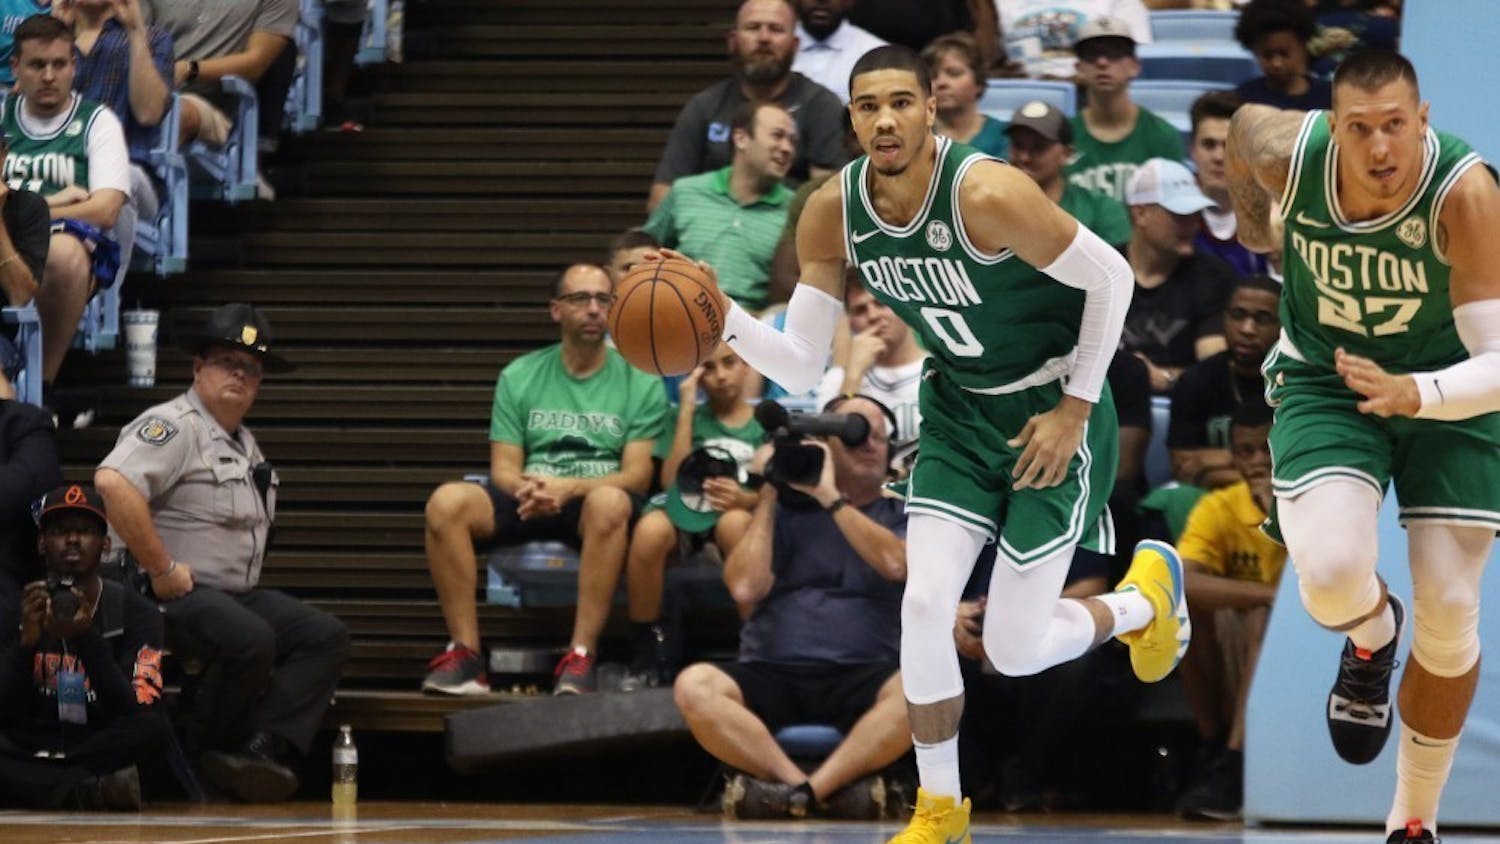 Tatum currently leads the Celtics with 26.6 points per game.